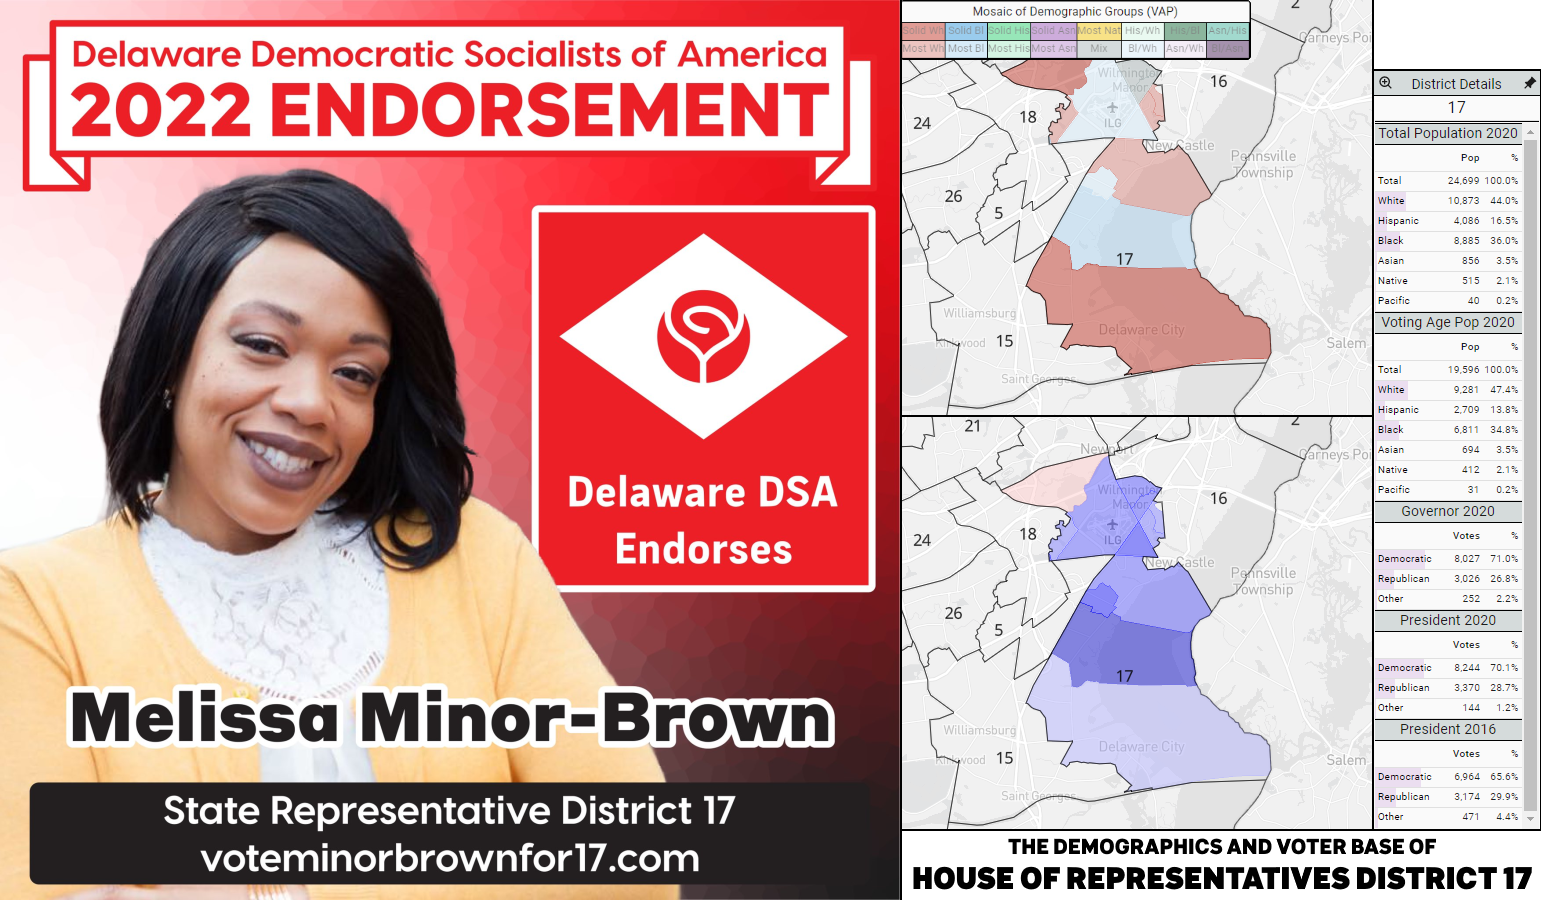 Melissa Minor-Brown's endorsement graphic (she/her; left) and a graphic of the demographics and voting base of House District 17 (right).